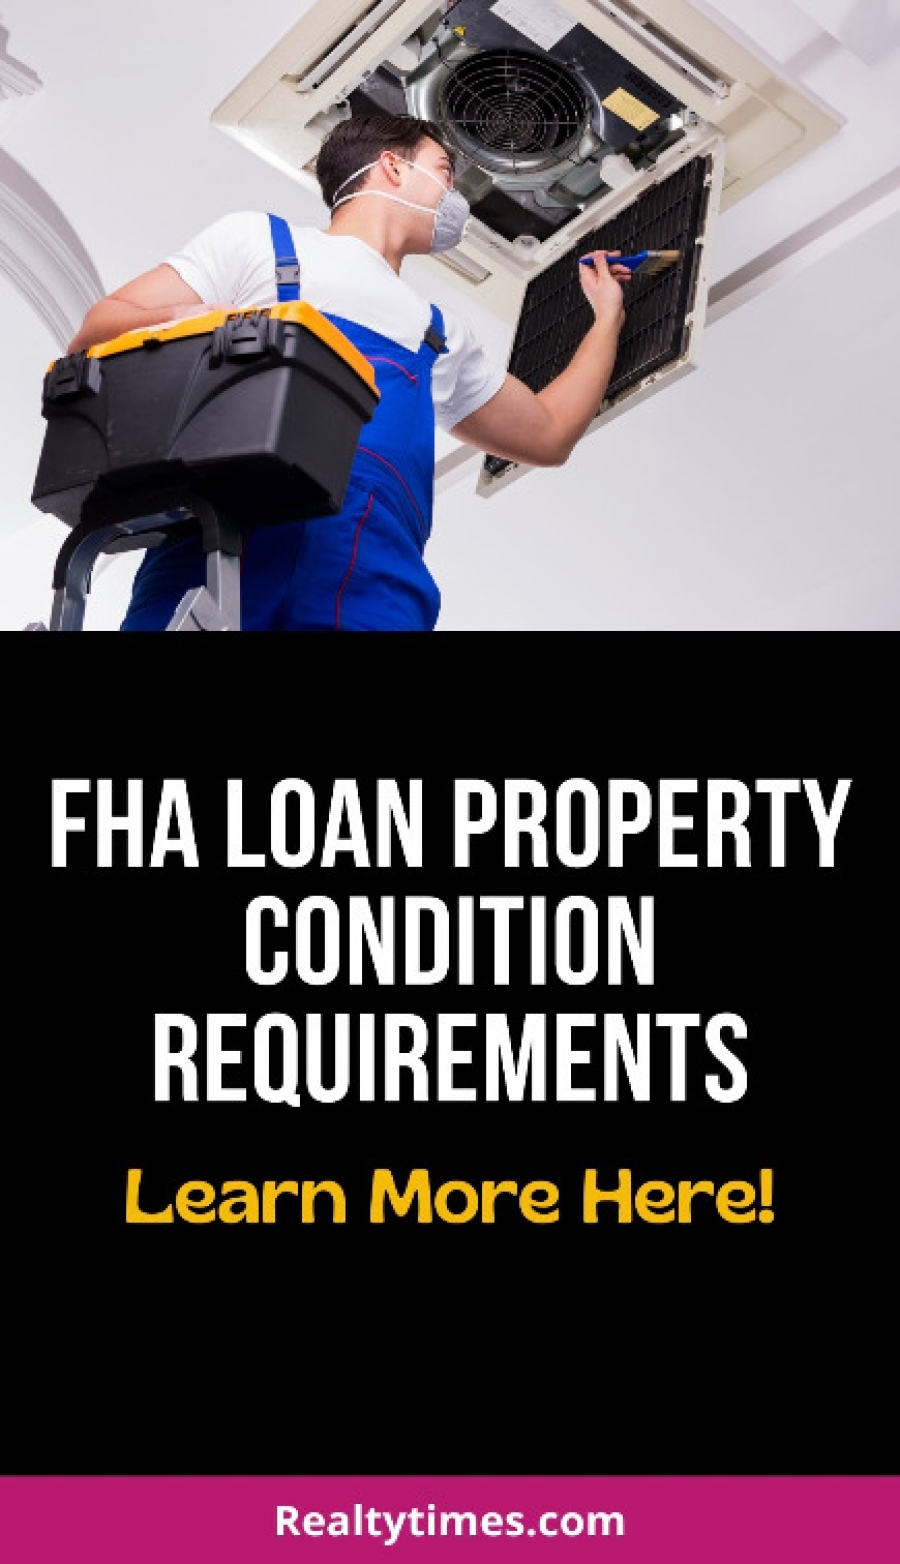 FHA Loan Condition Requirements For Homes